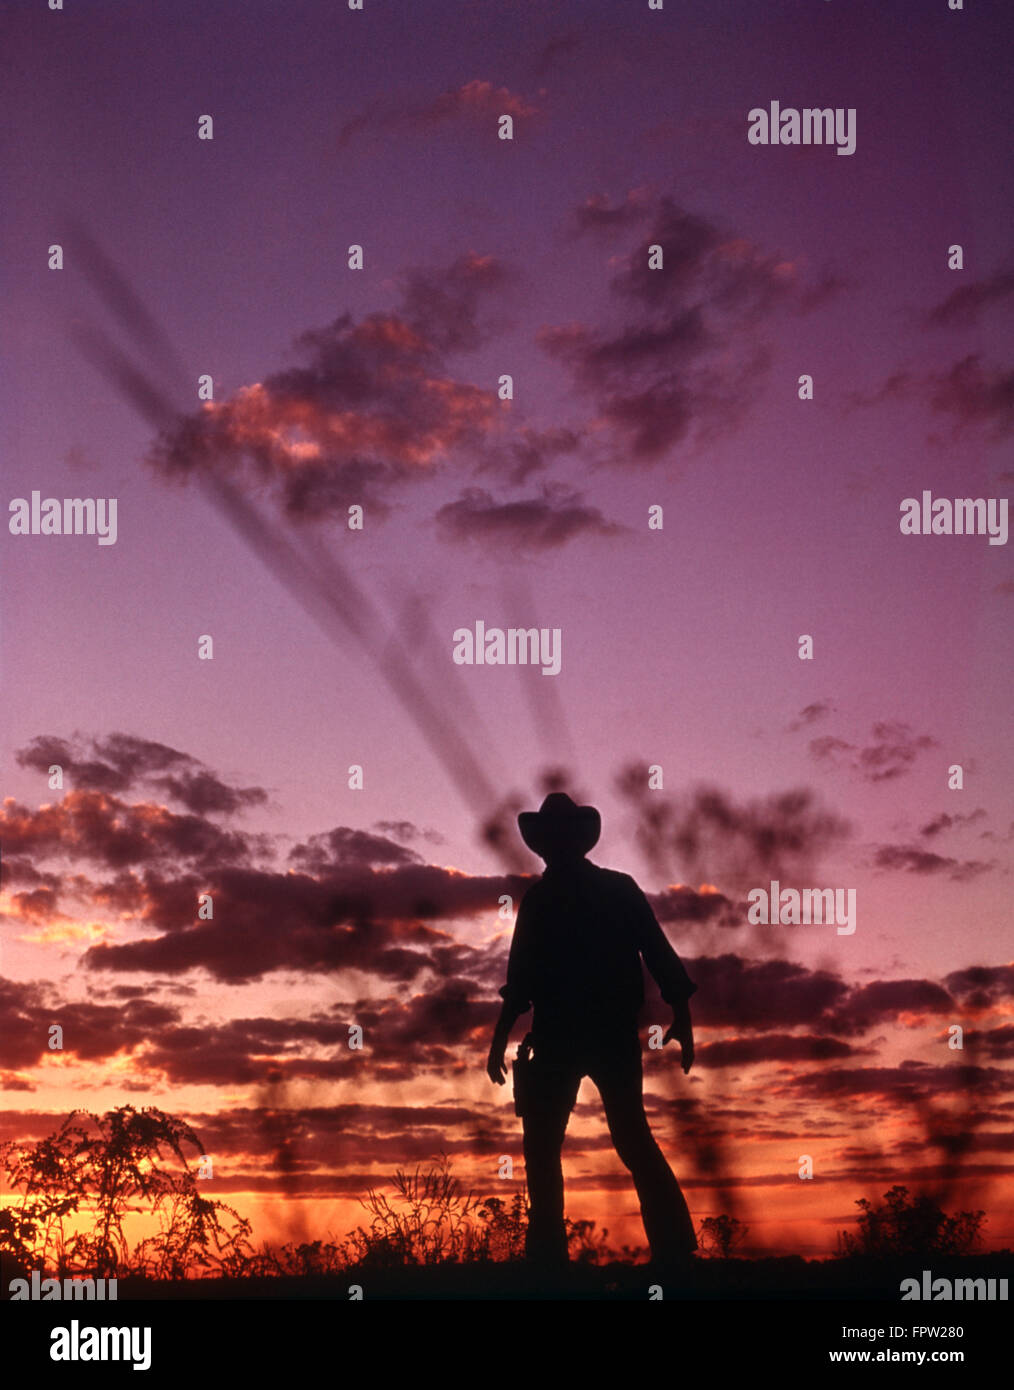 ANONYMOUS COWBOY GUNFIGHTER SILHOUETTED AT DUSK BY SUNSET SKY Stock Photo